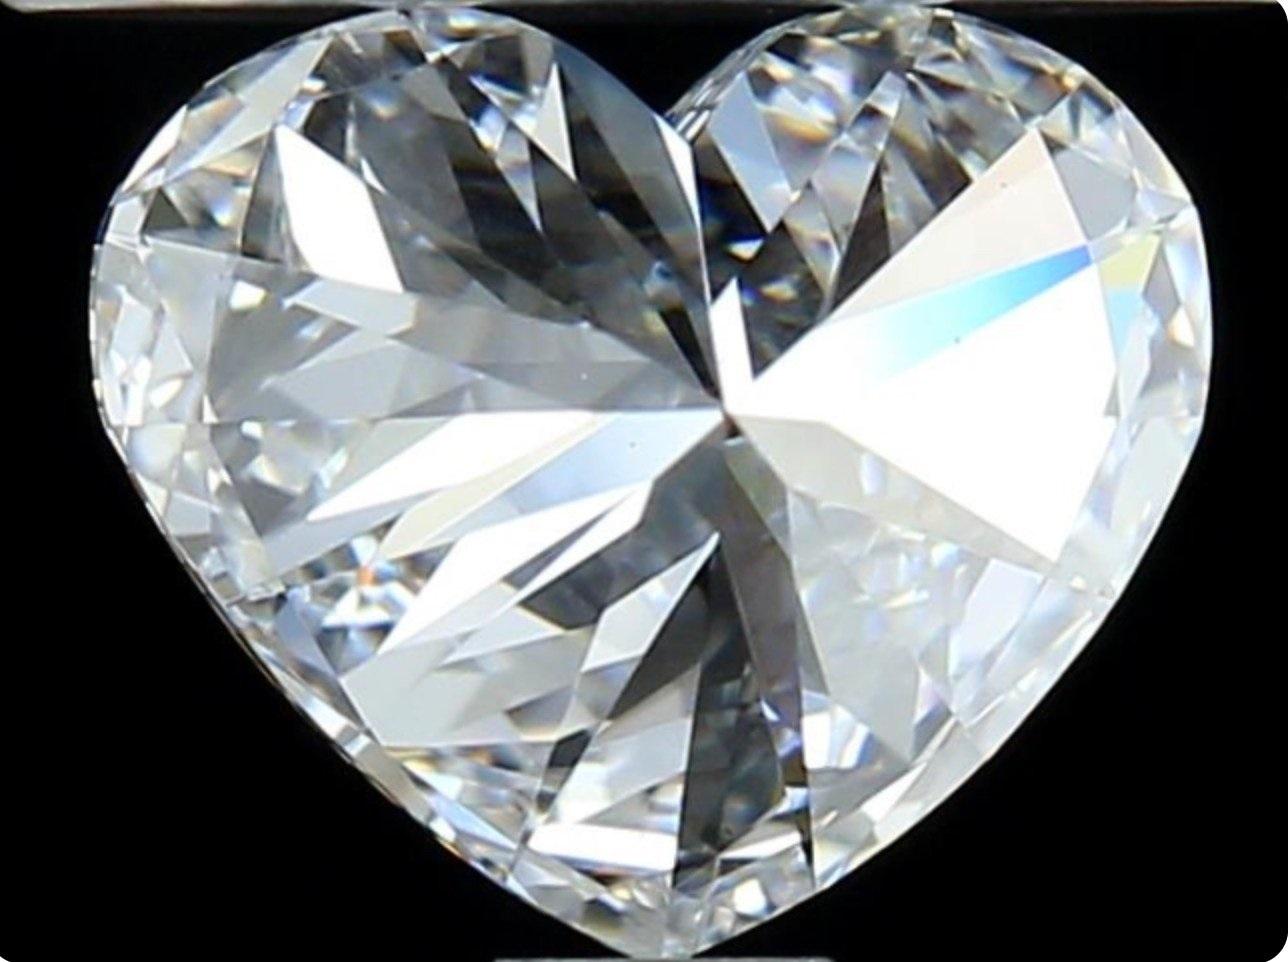 Pair of ideal and brilliant heart shape natural diamonds in a 0.60 total carat weight F SI1 Ideal cut Heart with GIA Certificate and laser inscription number.

GIA 1413278594 & 1403432687

Sku: 579 & 893